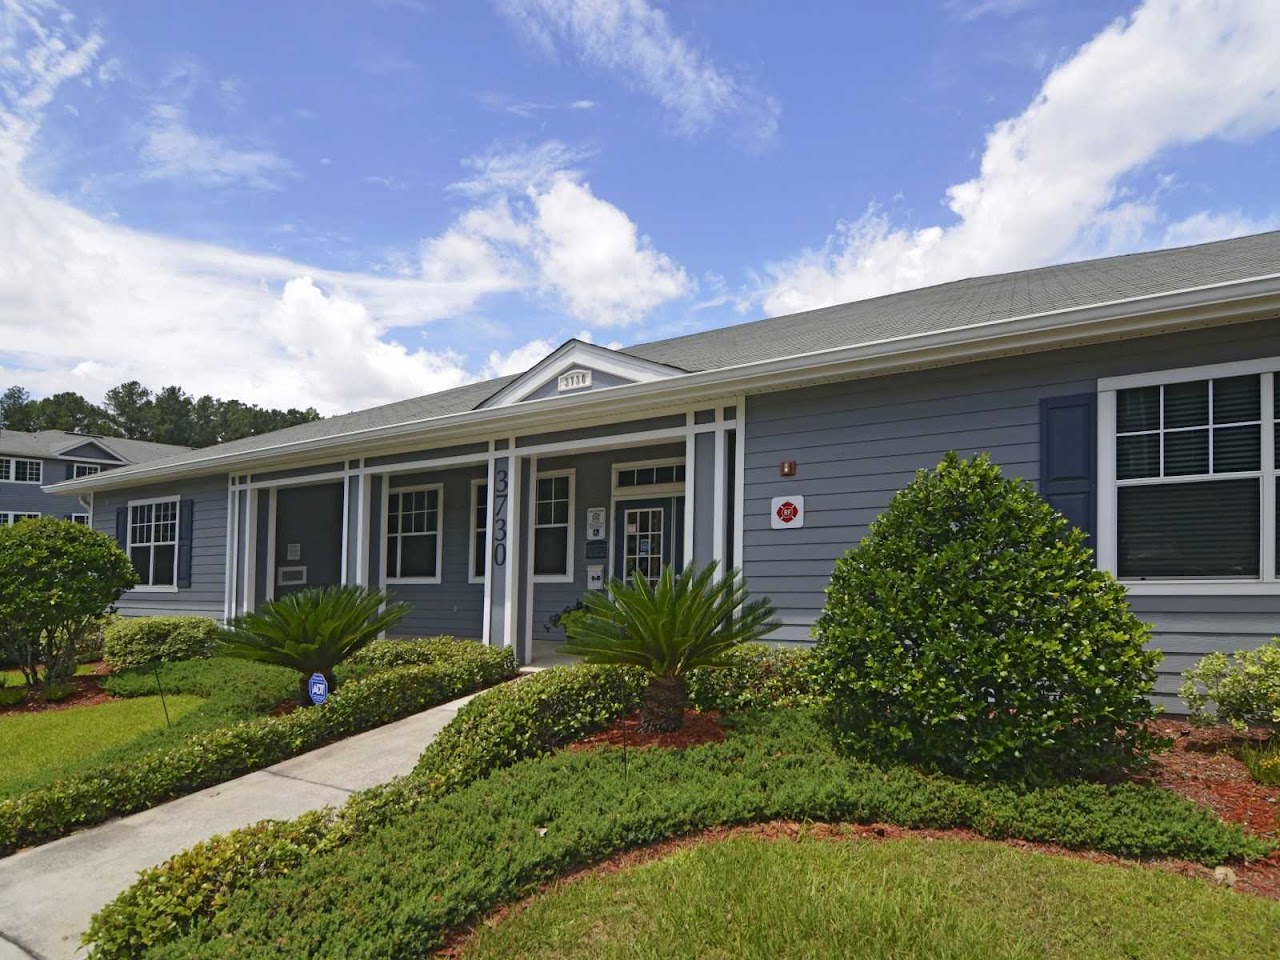 Photo of CHRISTINE COVE. Affordable housing located at 3730 SOUTEL DR JACKSONVILLE, FL 32208